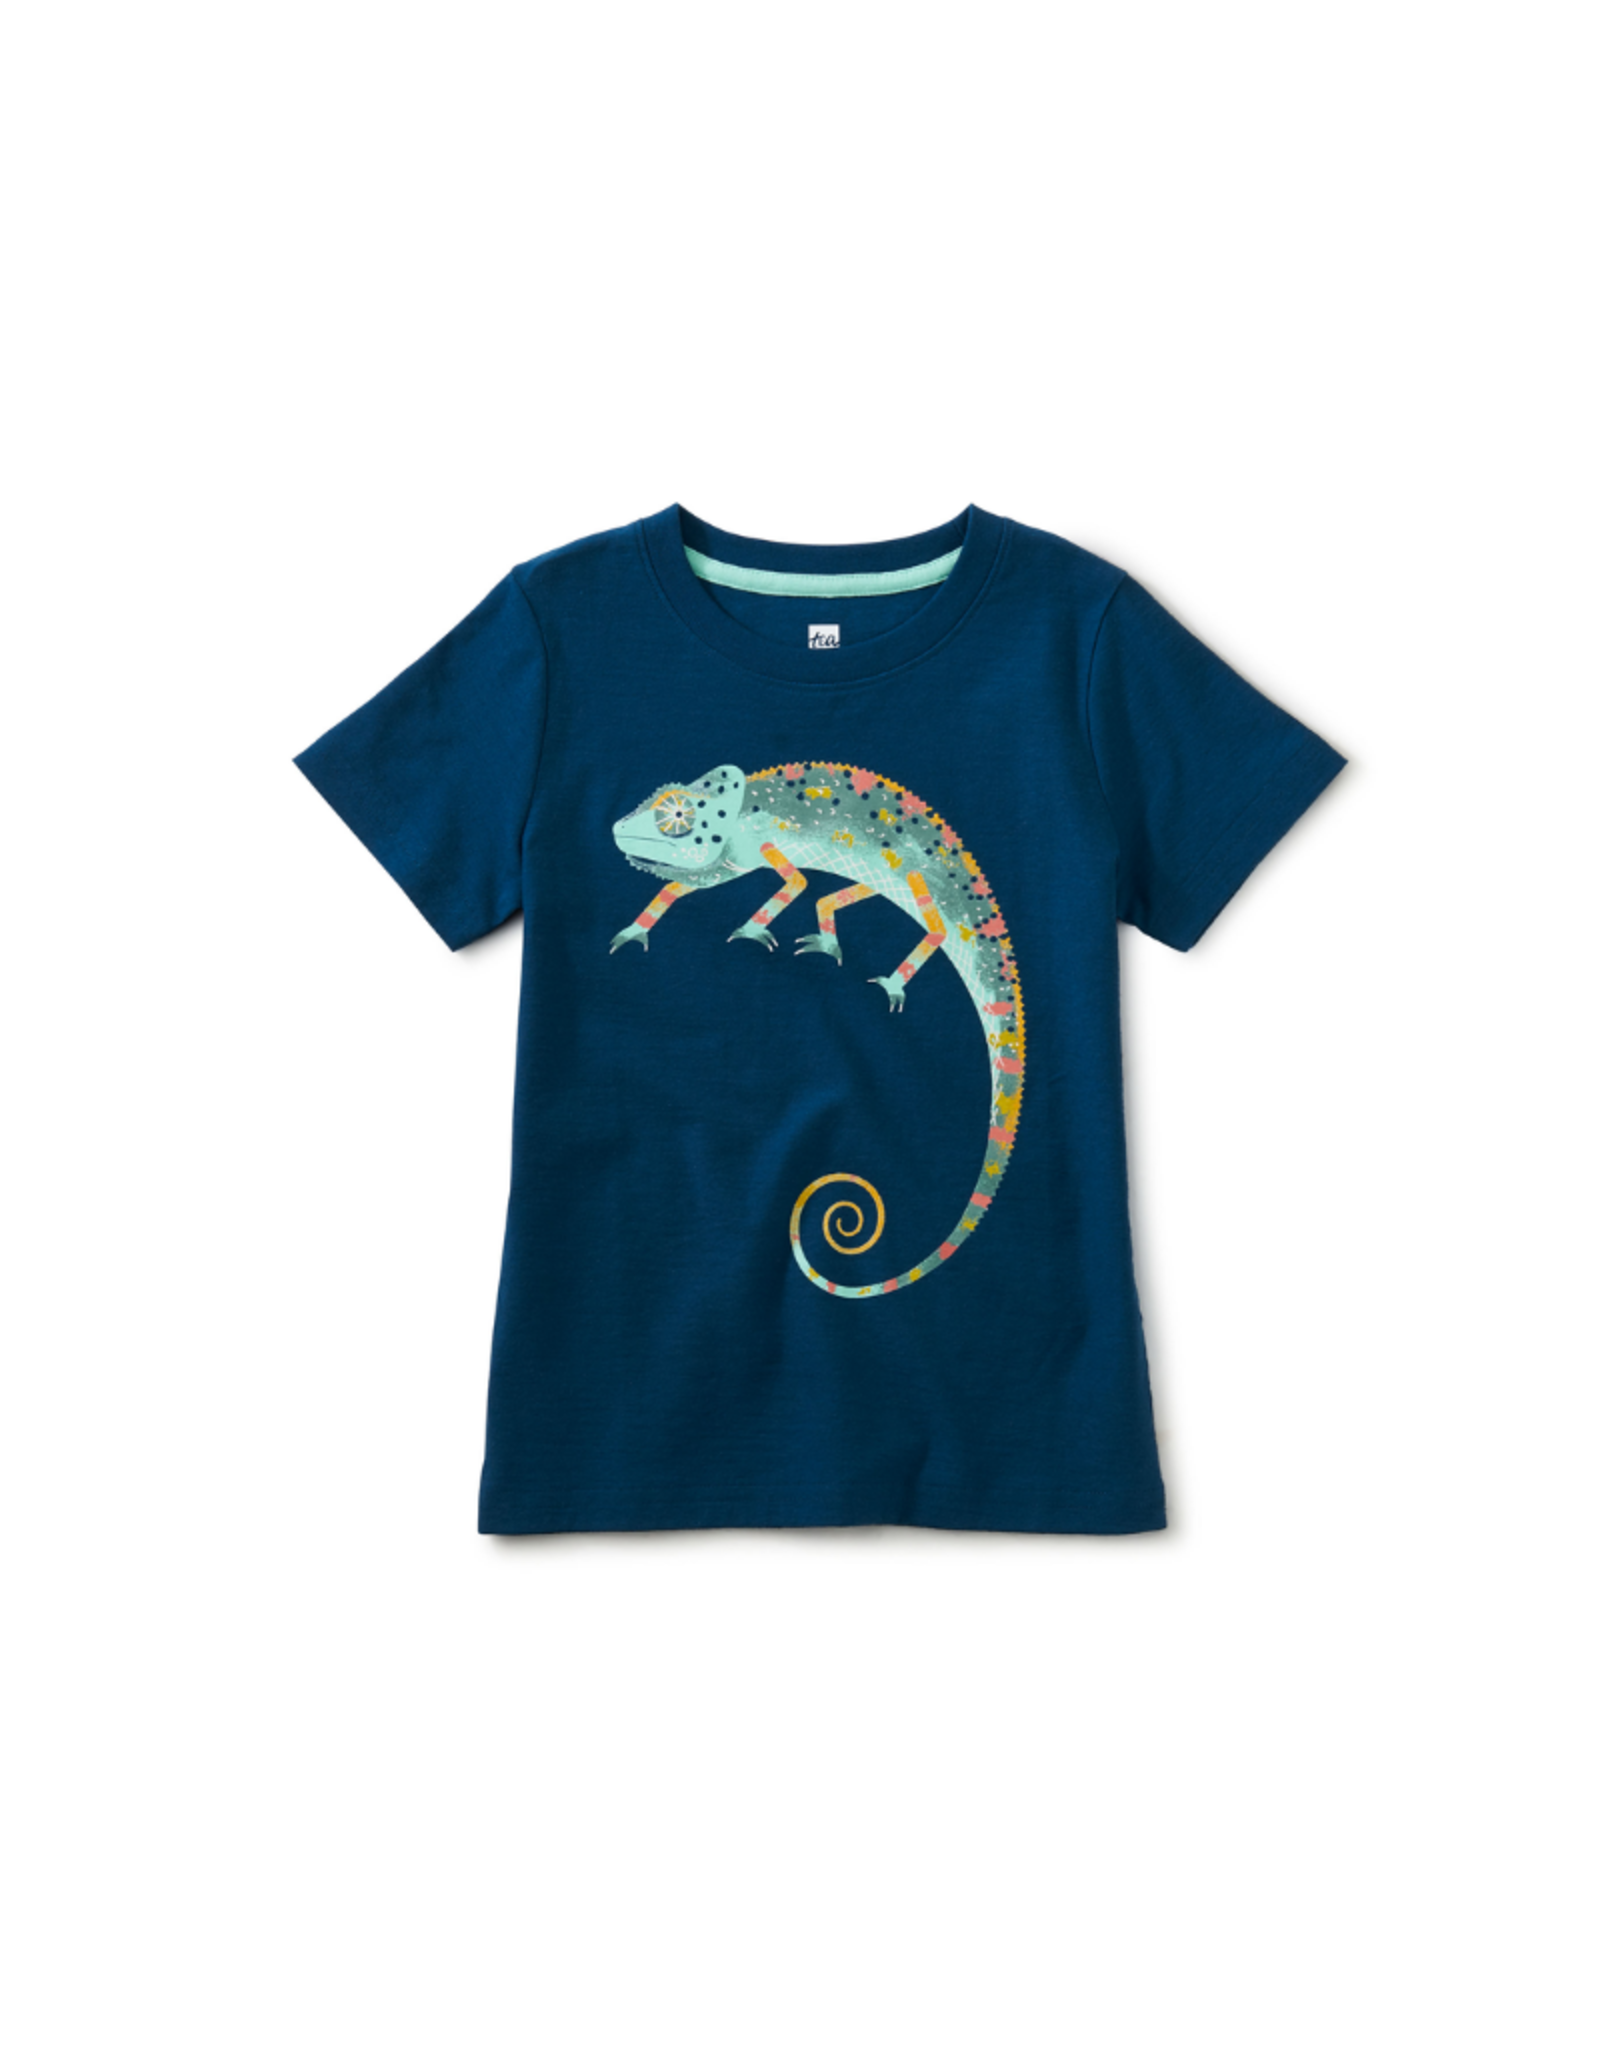 Cool as a Chameleon Graphic Tee